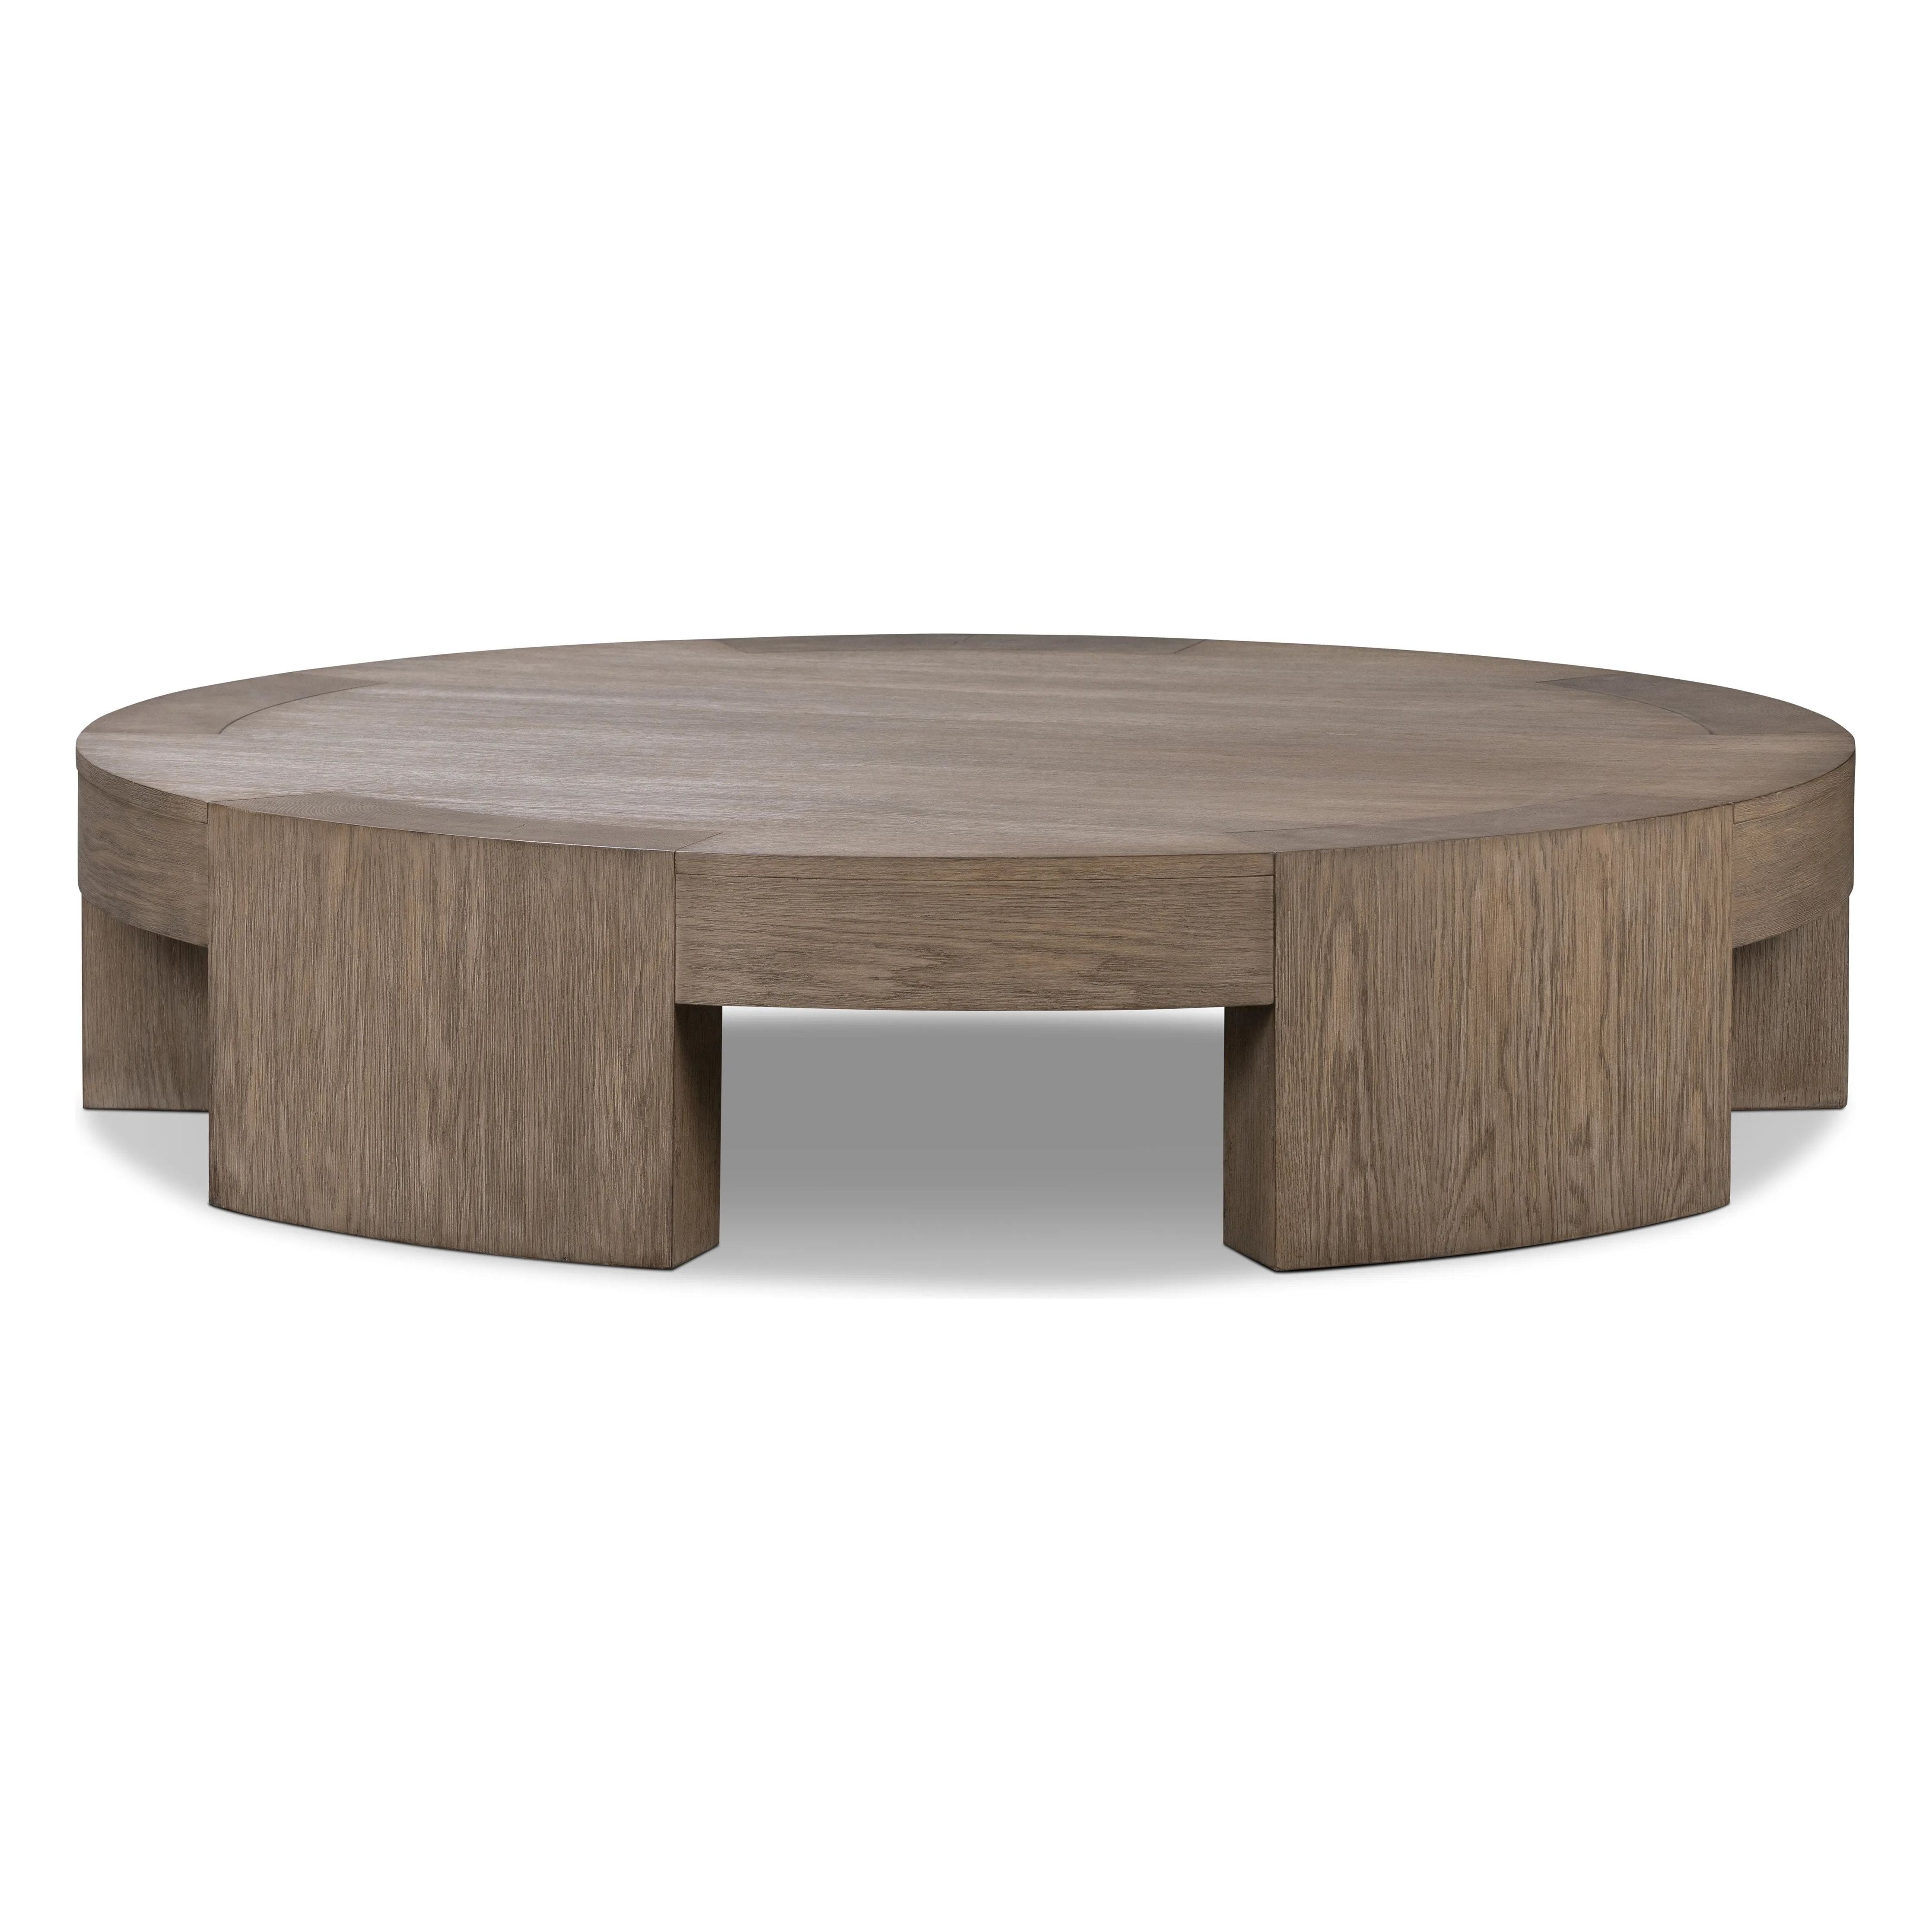 A simple stunner. This large coffee table features exposed joinery from five thick, gently curved legs. Crafted from a beautiful oak veneer with exposed graining throughout.Collection: Irondal Amethyst Home provides interior design, new home construction design consulting, vintage area rugs, and lighting in the Omaha metro area.